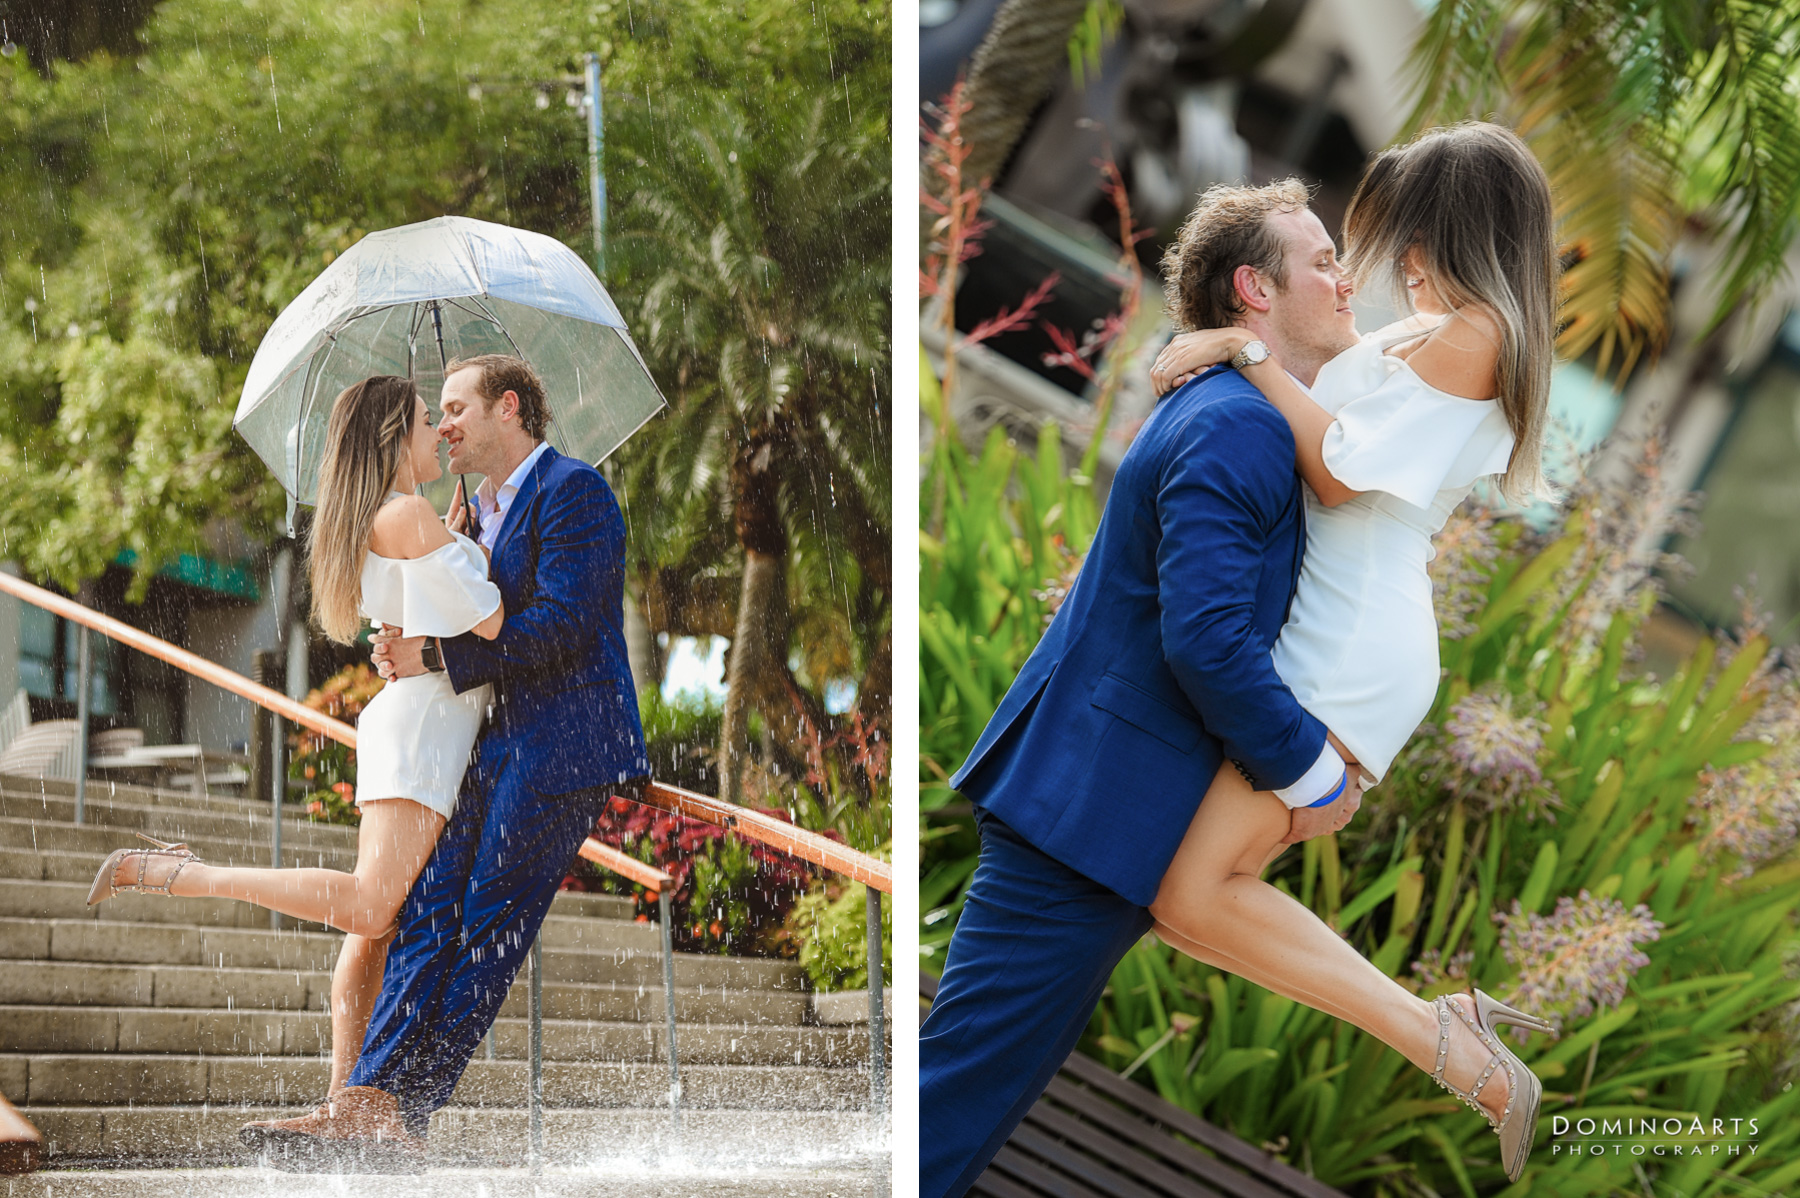 Dancing in the Rain Engagement photography at Riverfront, Fort Lauderdale